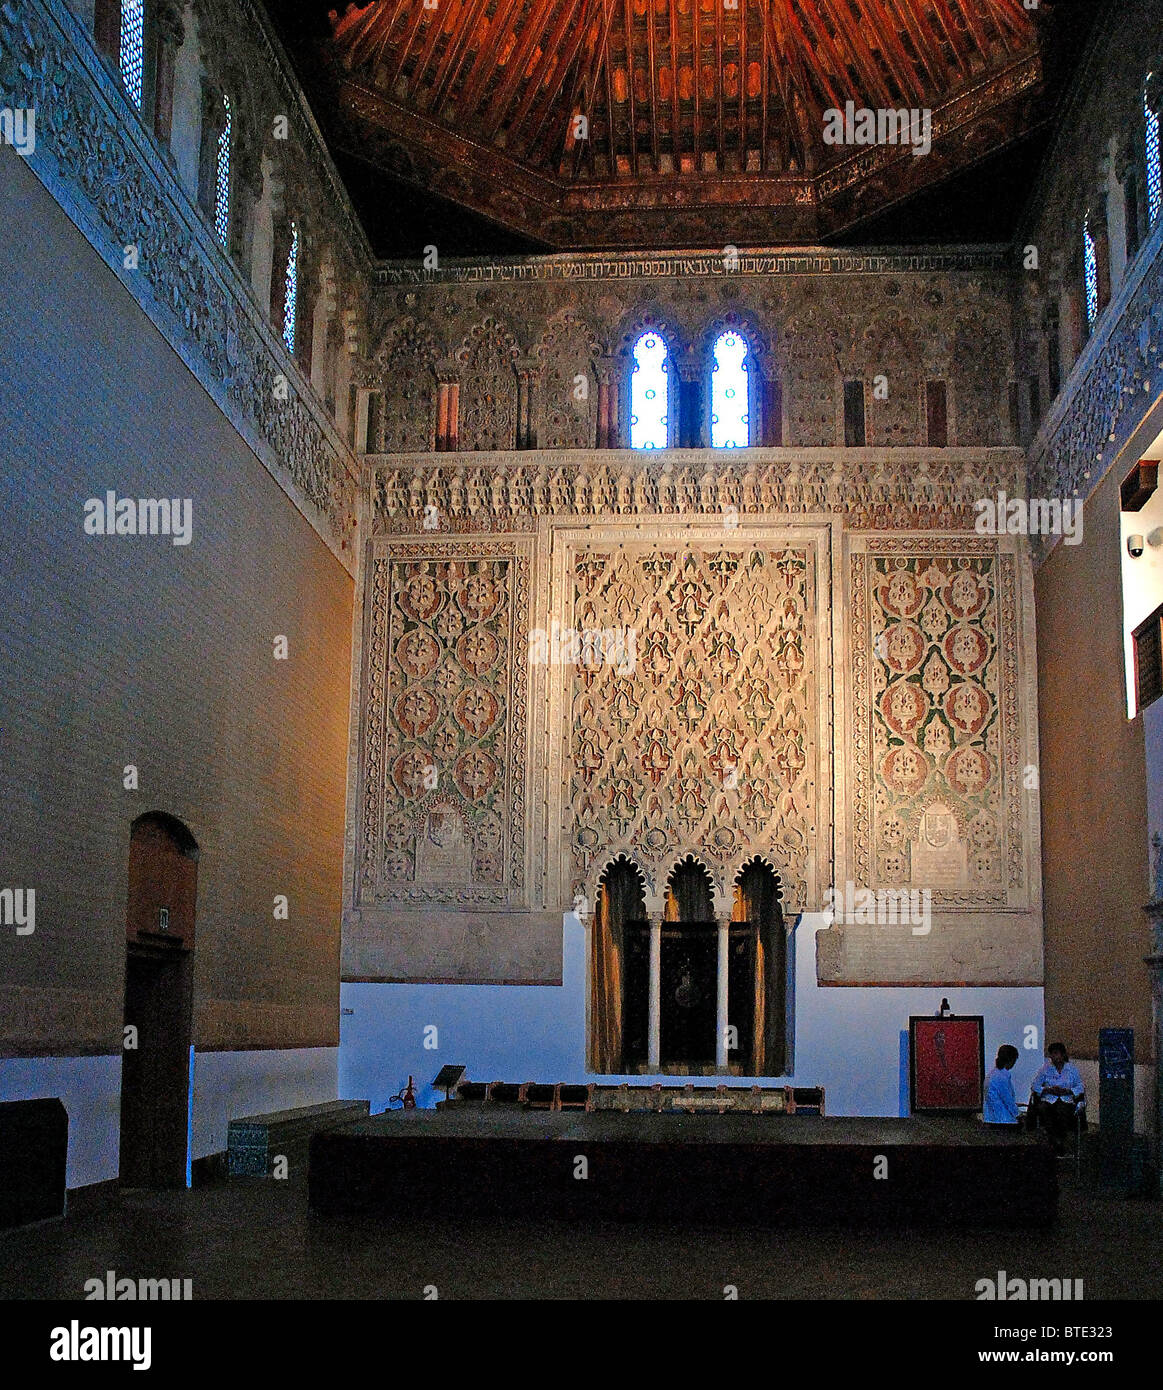 5409. Interior of the El Transito Synagogue in Toledo, Spain. Built by Samuel Ben Meir Ha-Levi Abulafia  in c.1320-1360. The int Stock Photo